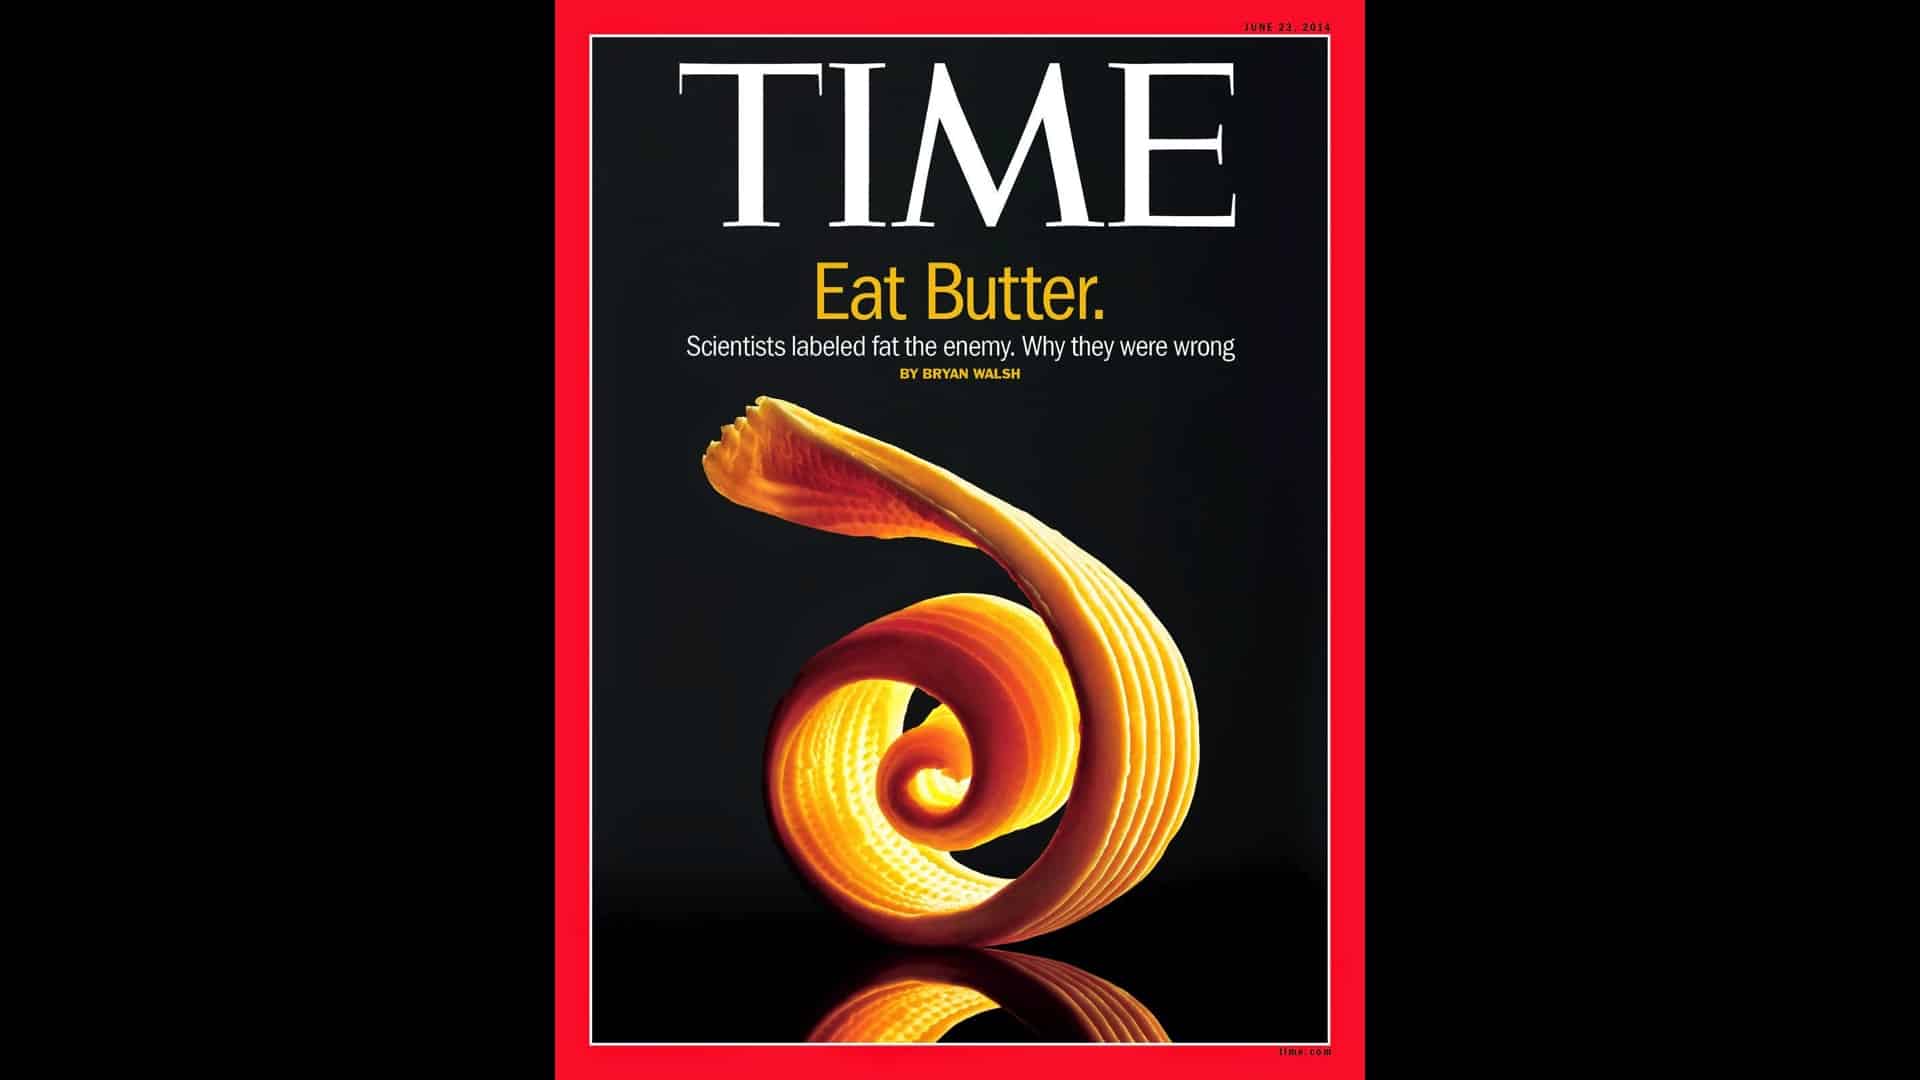 The Saturated Fat Studies- Buttering Up the Public